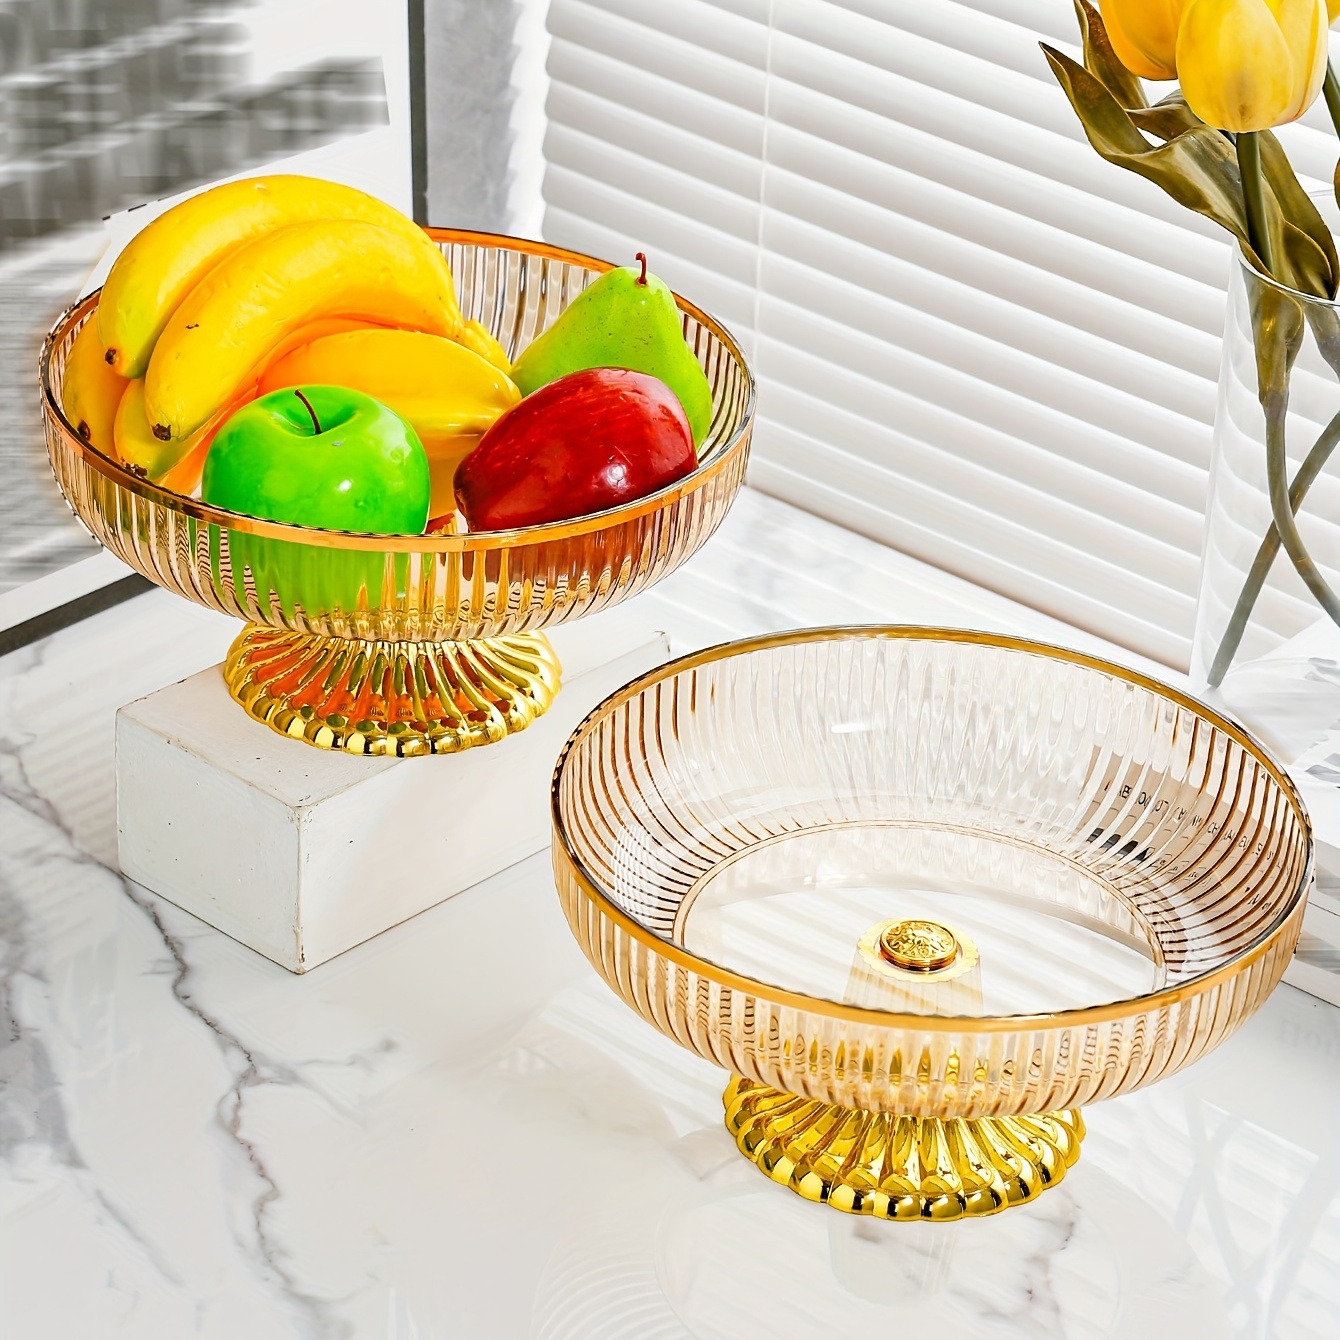 Plastic Fruit Bowl Food Bowls Serving Bowl Eggs Bowl Holder Bowls with Base  for Home Decor Parties Birthday Farmhouse Baking